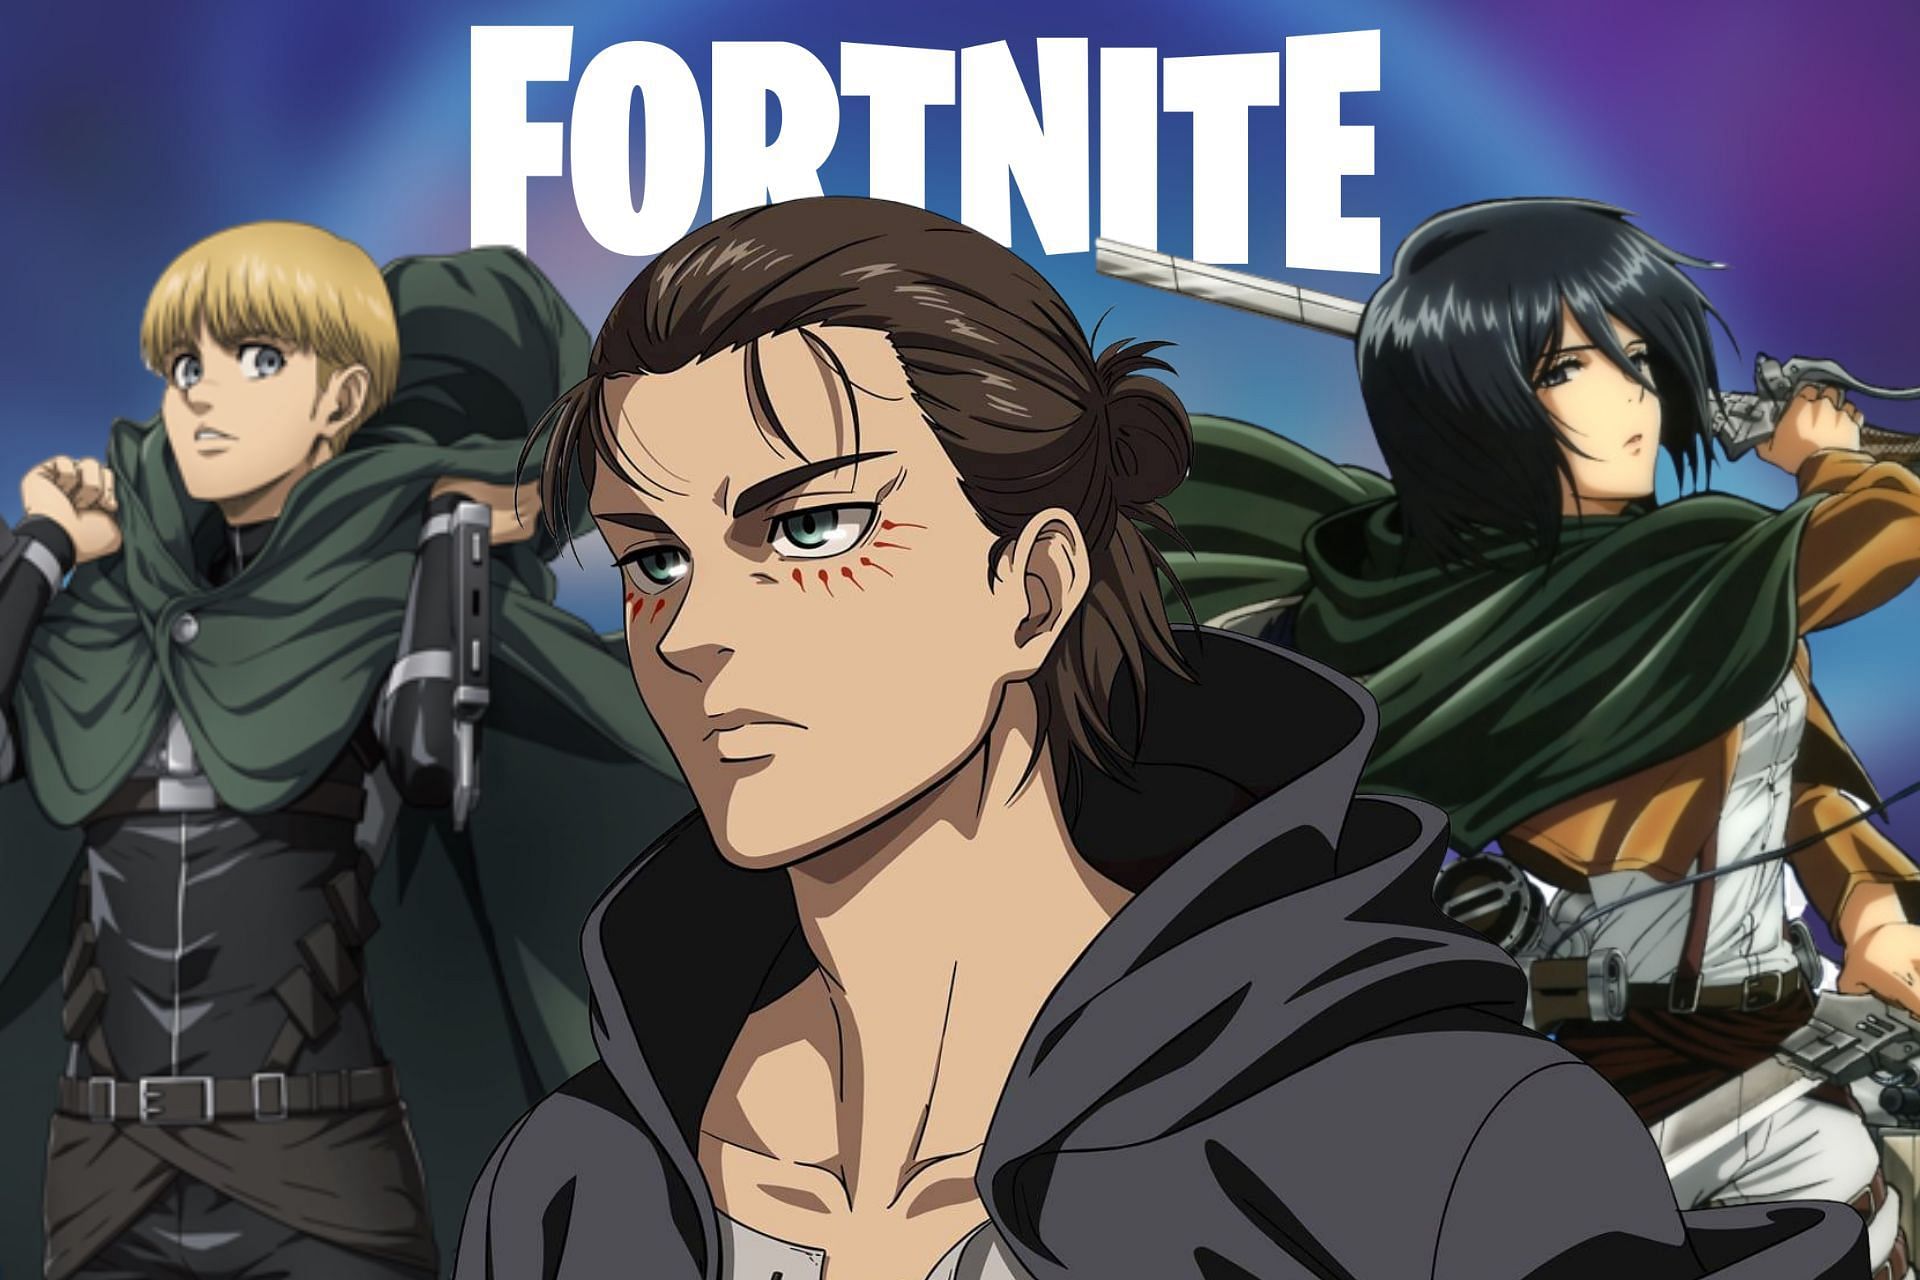 The Top 6 Fortnite Skins for Anime Fans